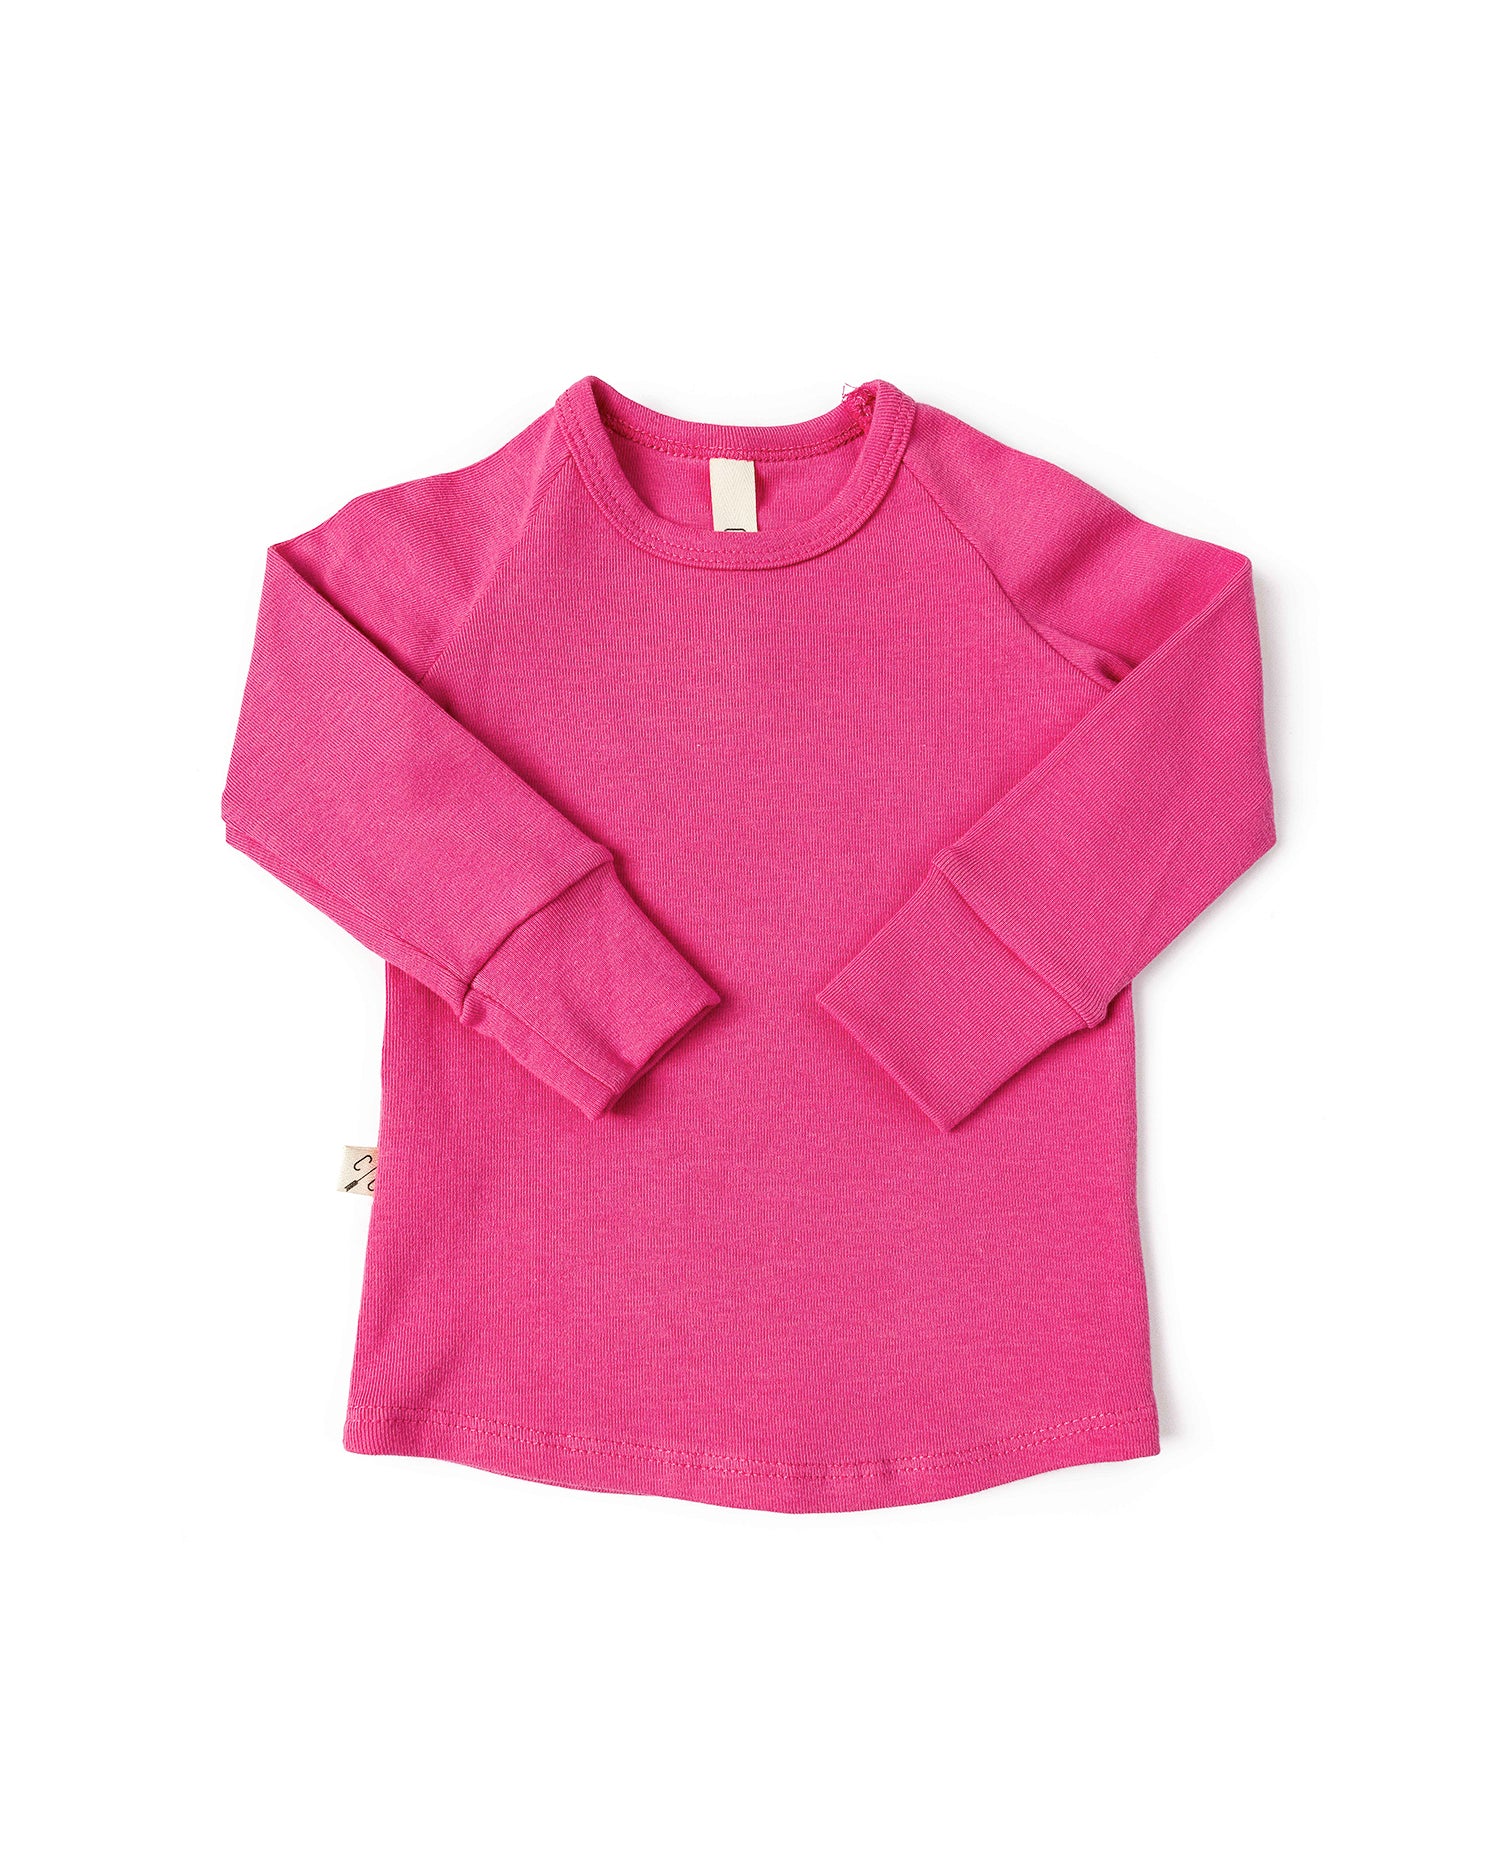 Rib Knitted Long Sleeve Top Pink